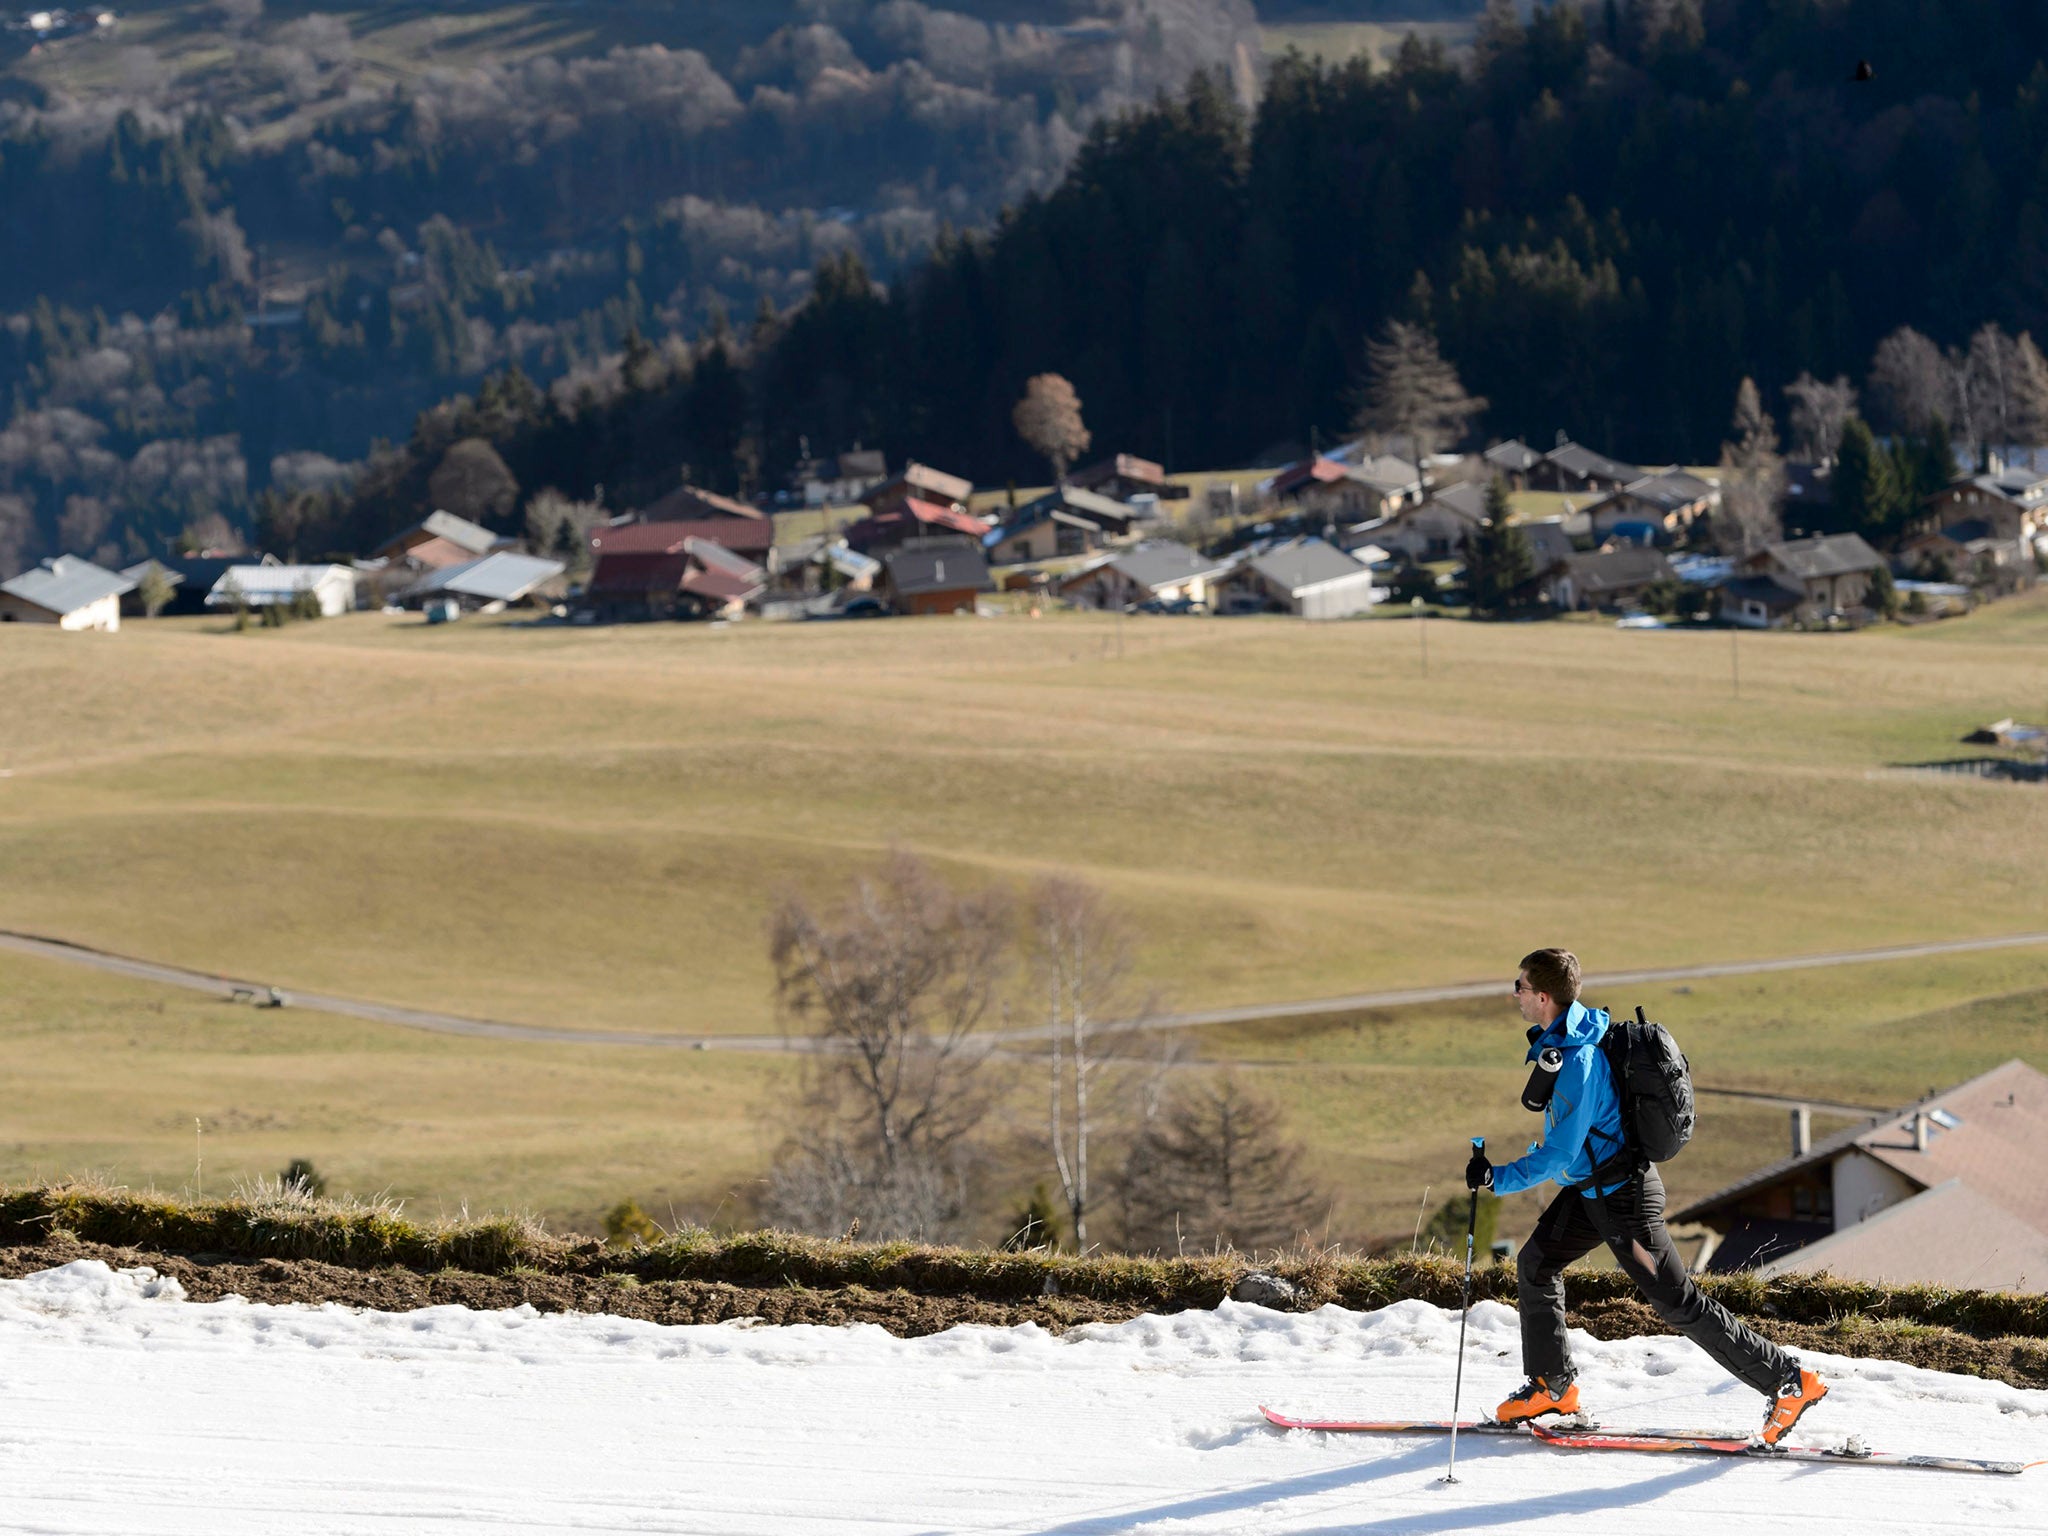 A Skier in action on a ski slope covered with artificial snow surrounded by green fields, in the Swiss Alps, during Christmas holydays, in Leysin, Switzerland. The snow has melted as a result of the mild temperatures throughout the last few days.